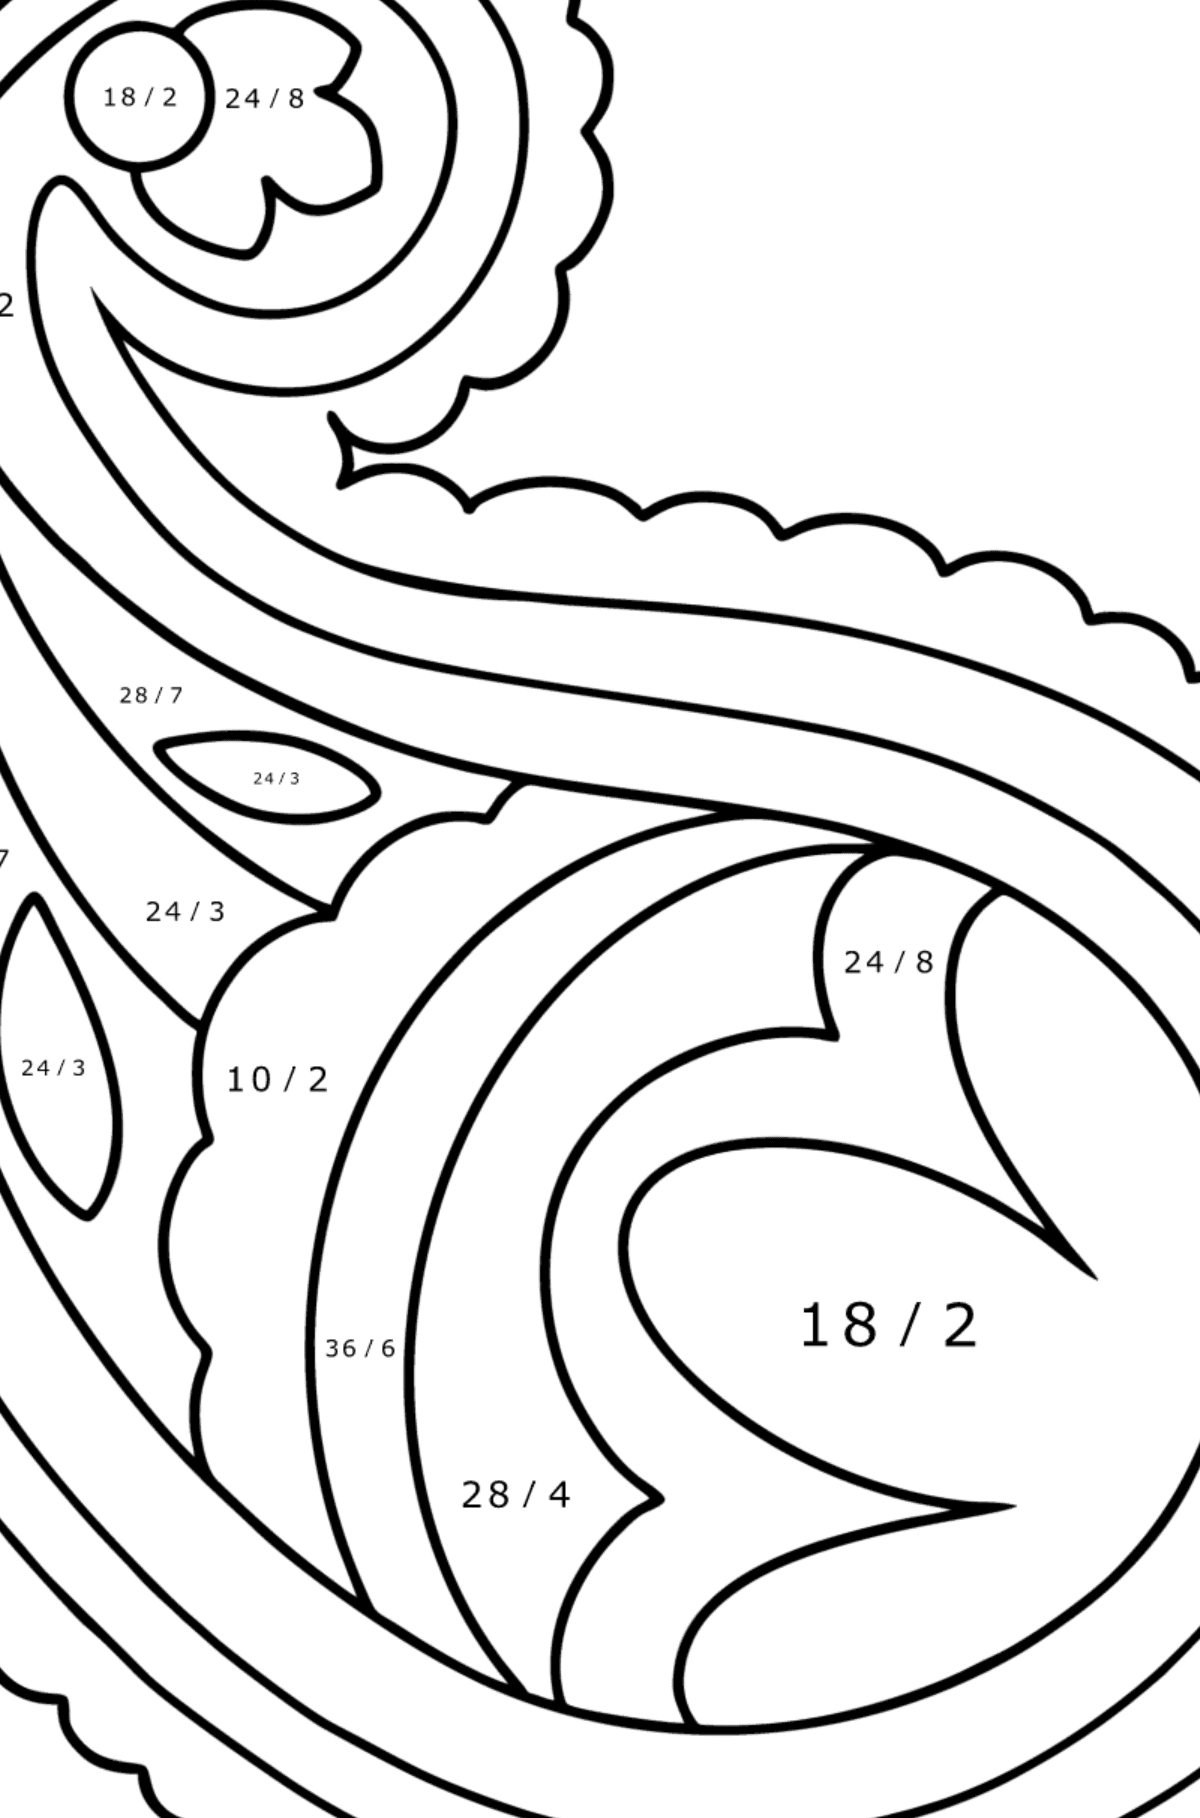 Paisley coloring page - 16 Elements - Math Coloring - Division for Kids